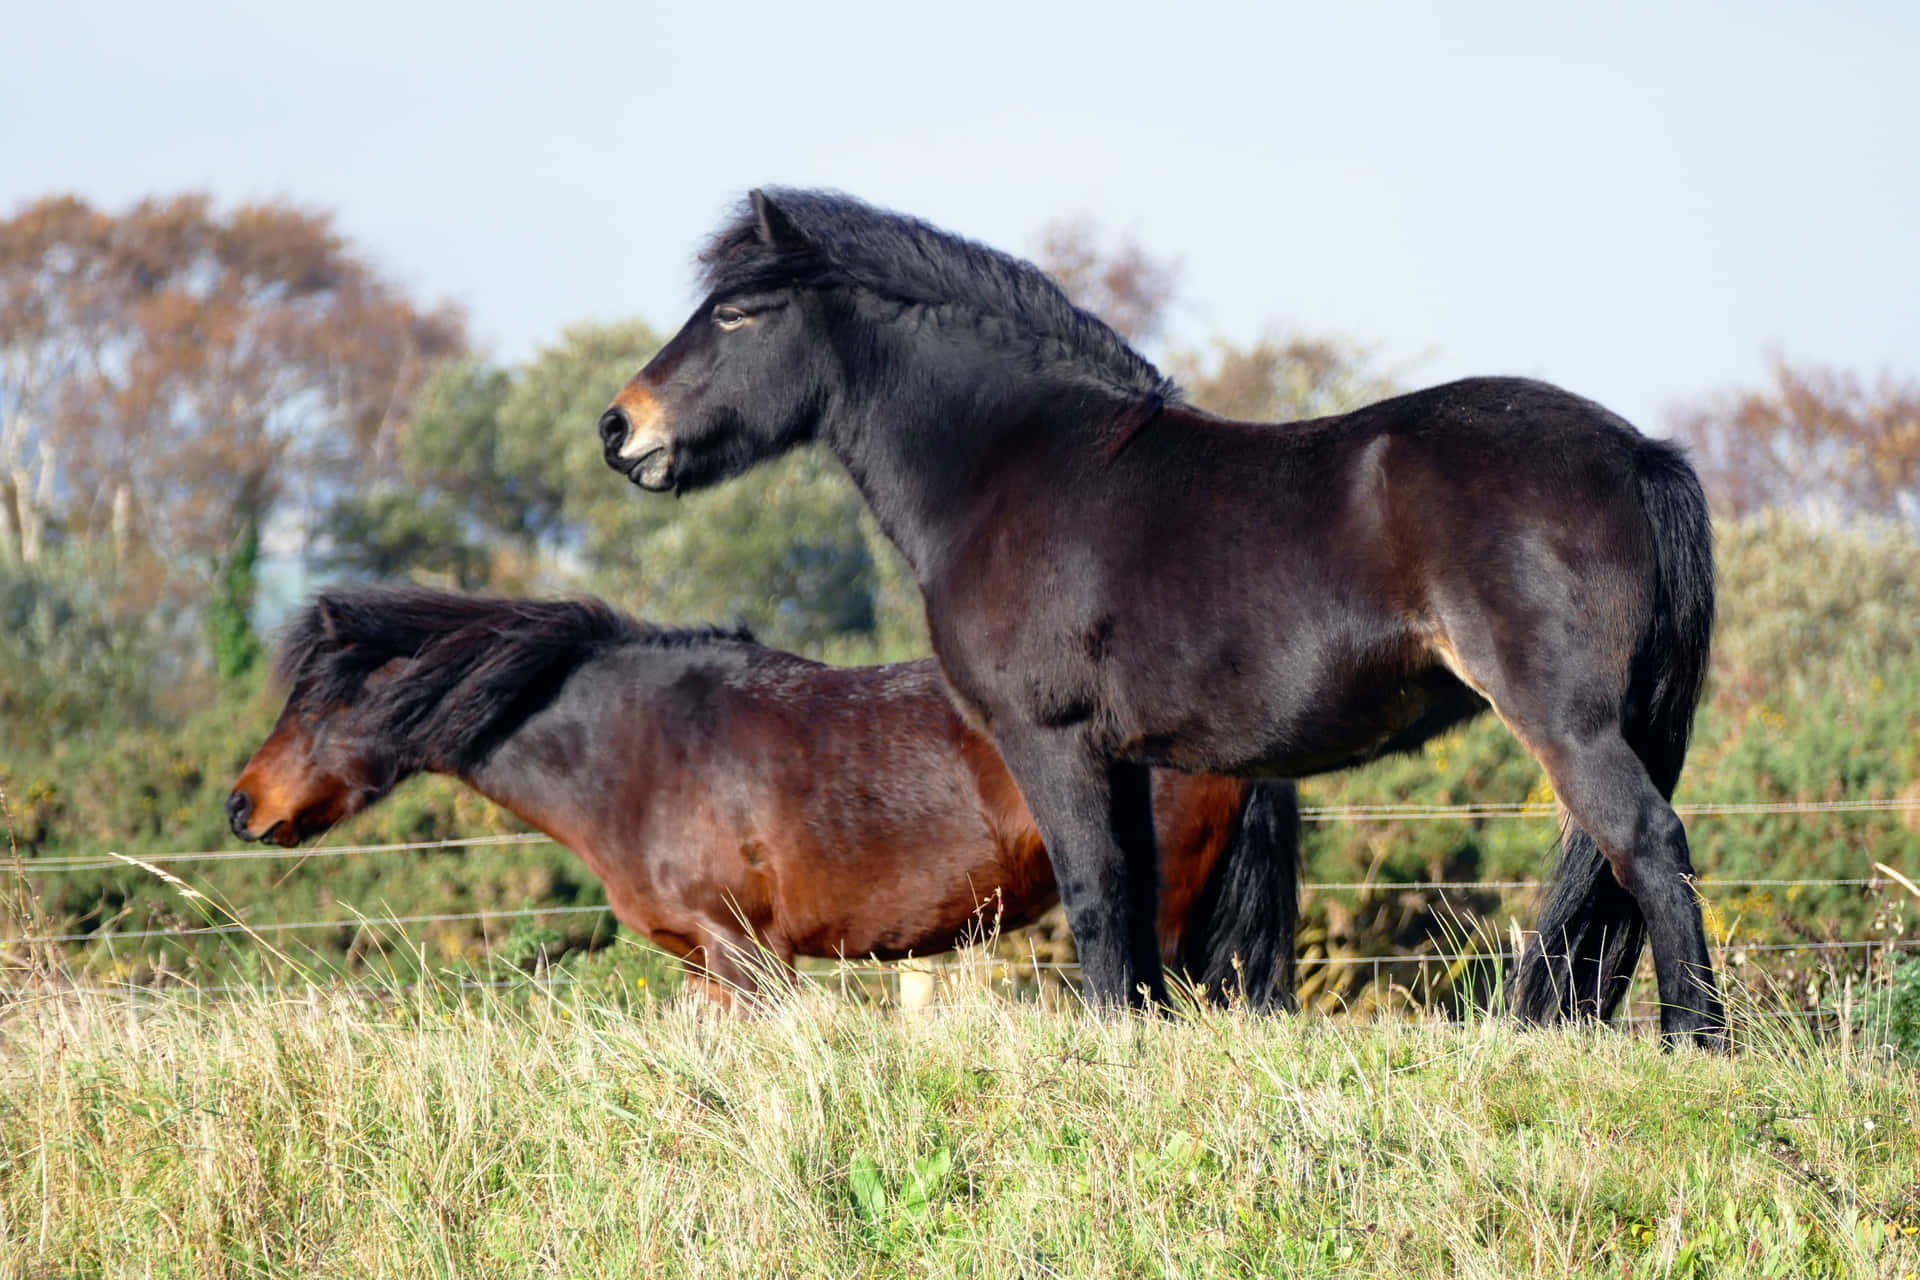 For two wild horses, there is nothing more beautiful than the open plains.